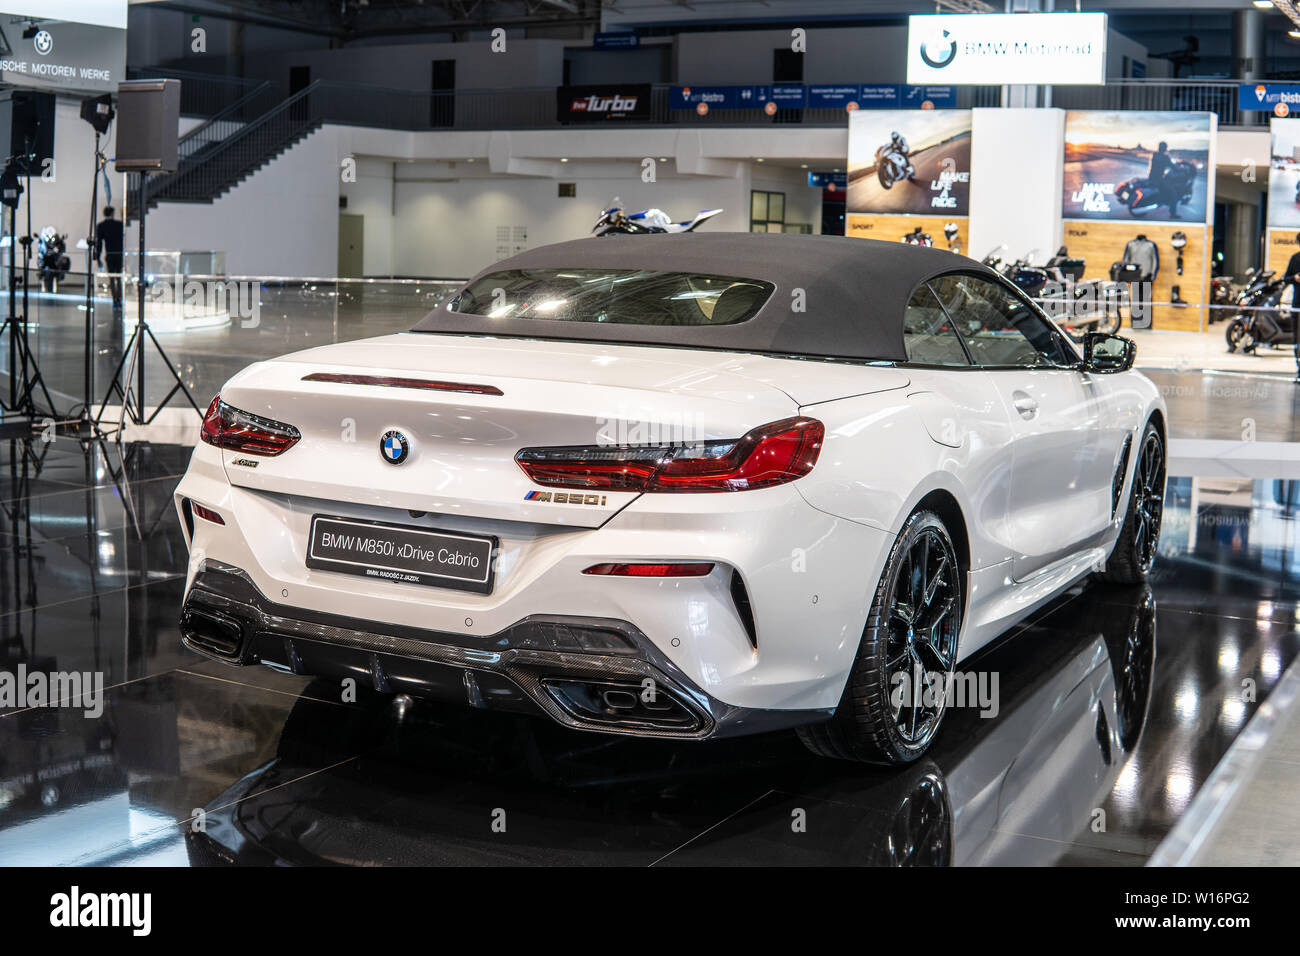 Poznan, Poland, March 2019: BMW The 8 Series xDrive Cabrio 850i, Poznan  International Motor Show, G14 cabriolet car manufactured and marketed by BMW  Stock Photo - Alamy